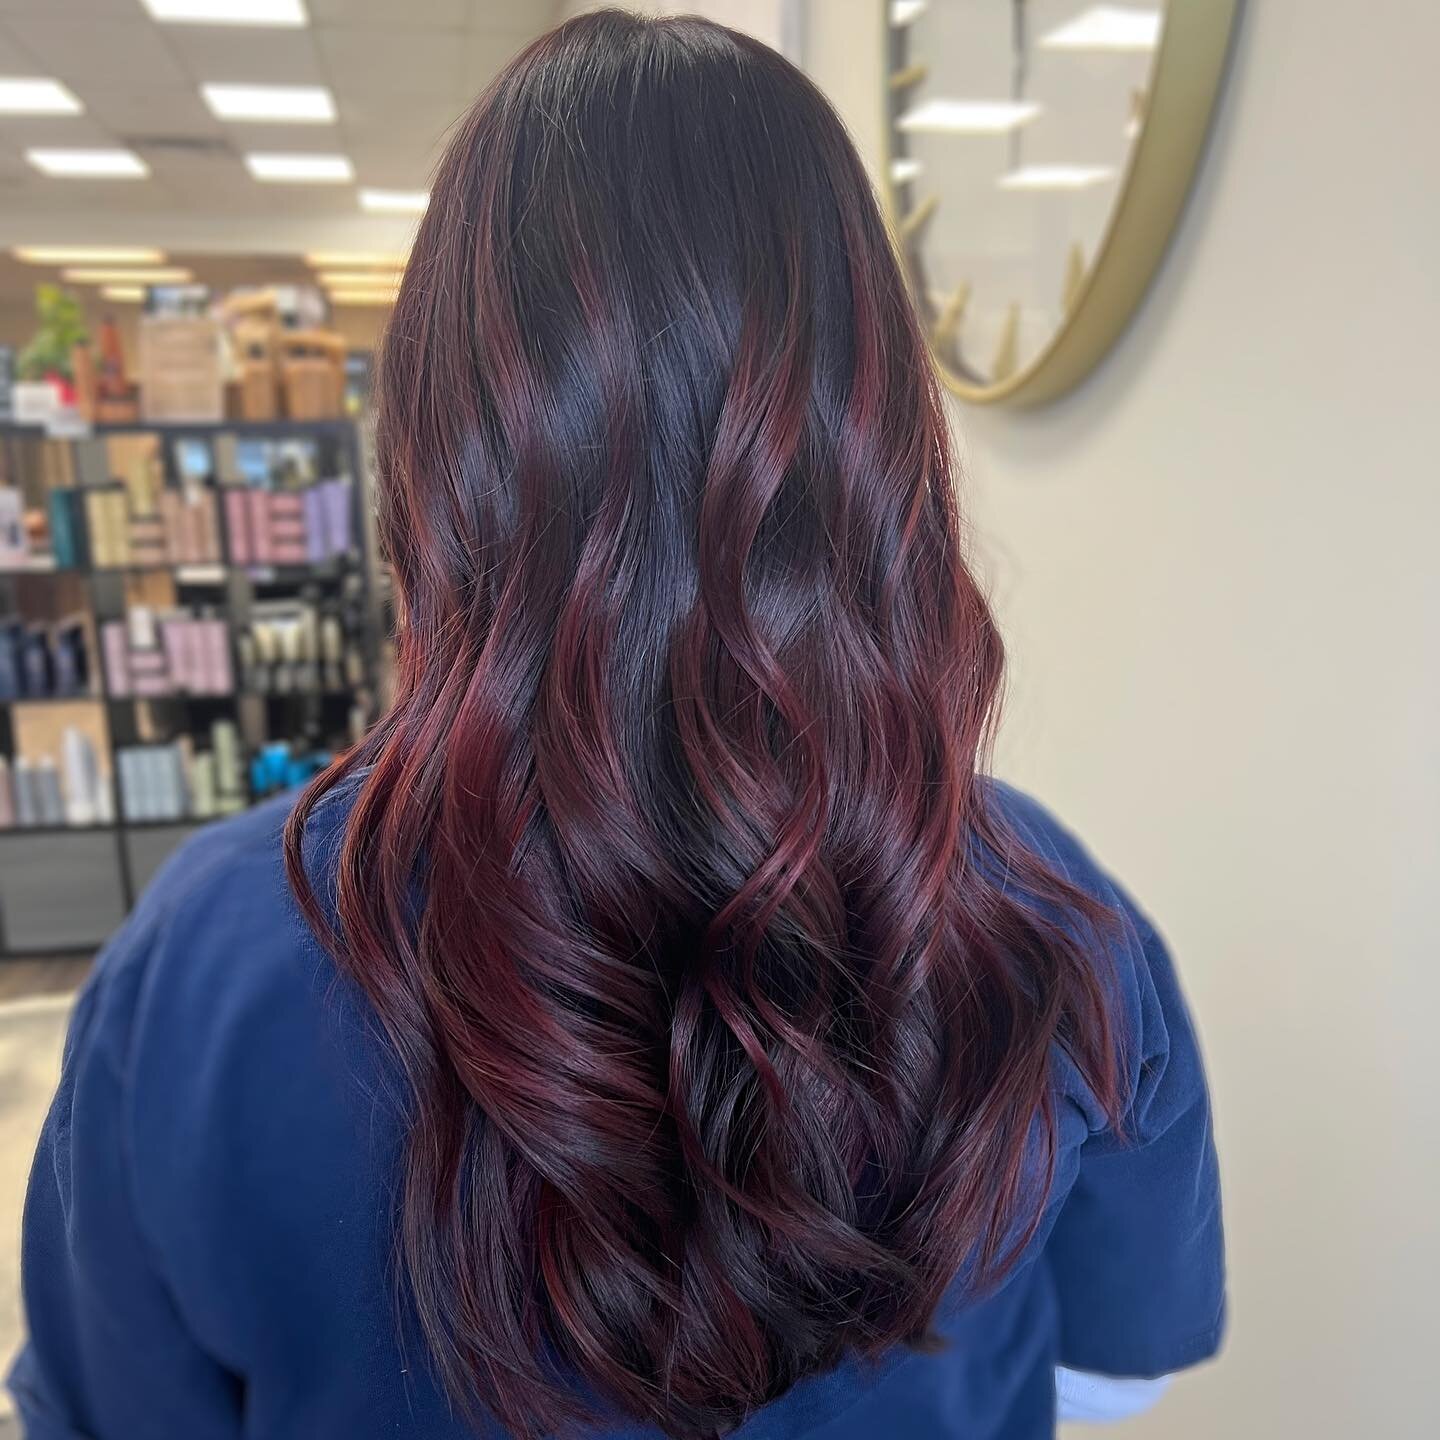 from grown out highlights to gorgeous mahogany 😍😍

the 0/50 shades by @lakmehair_usa are UNMATCHED and can allow you to create and customize SO MANY COLORS